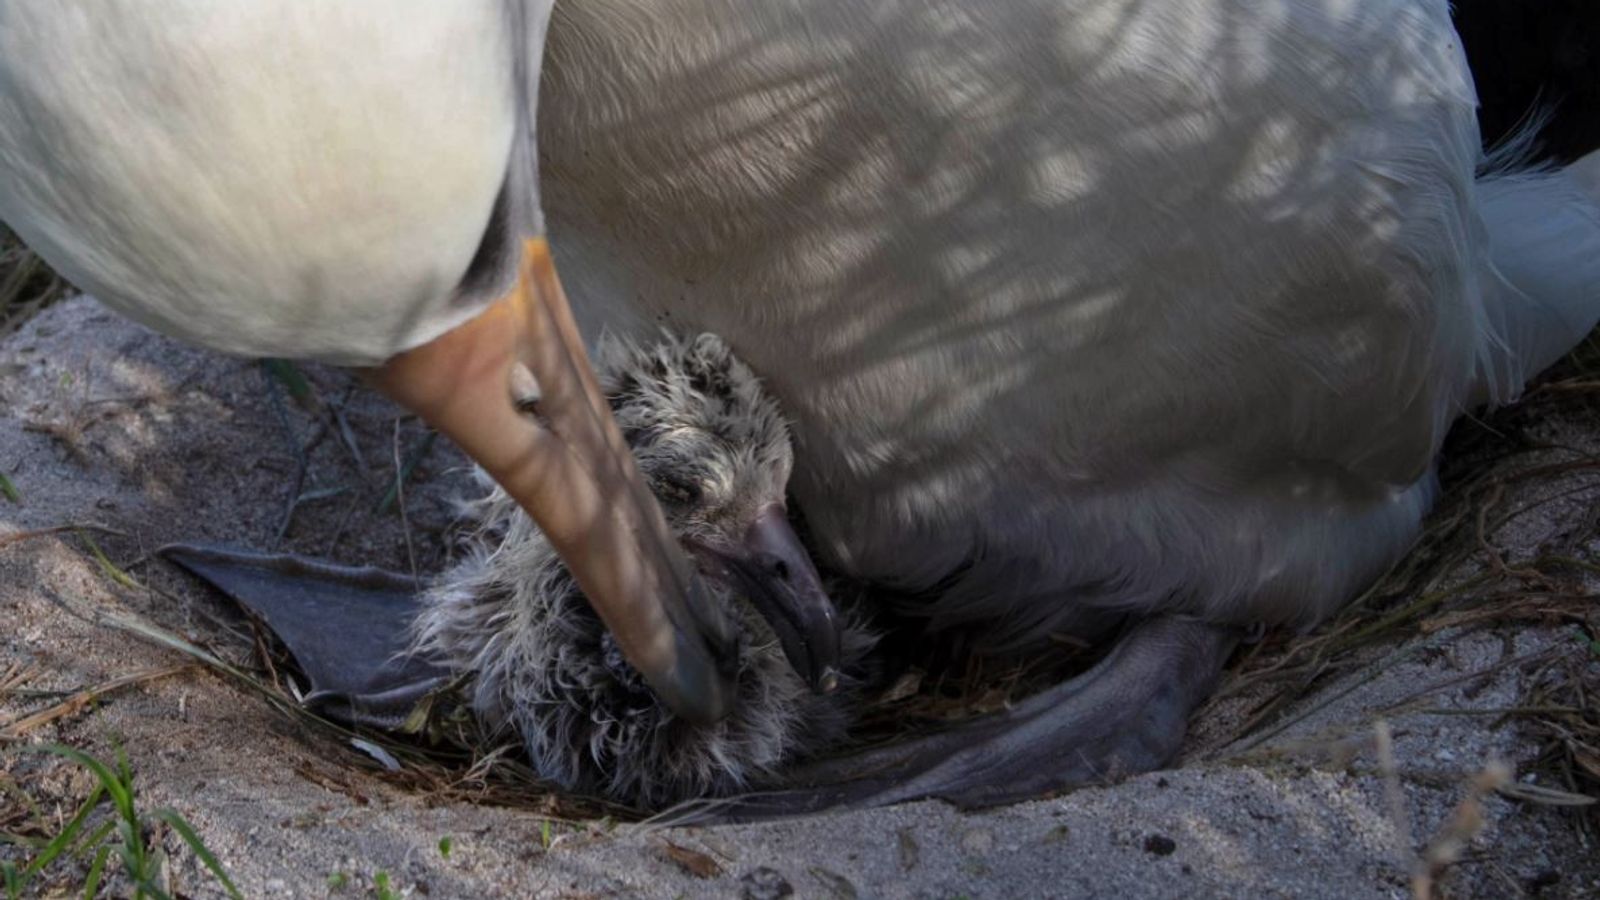 World's oldest bird, Wisdom the albatross, hatches chick at the age of 70